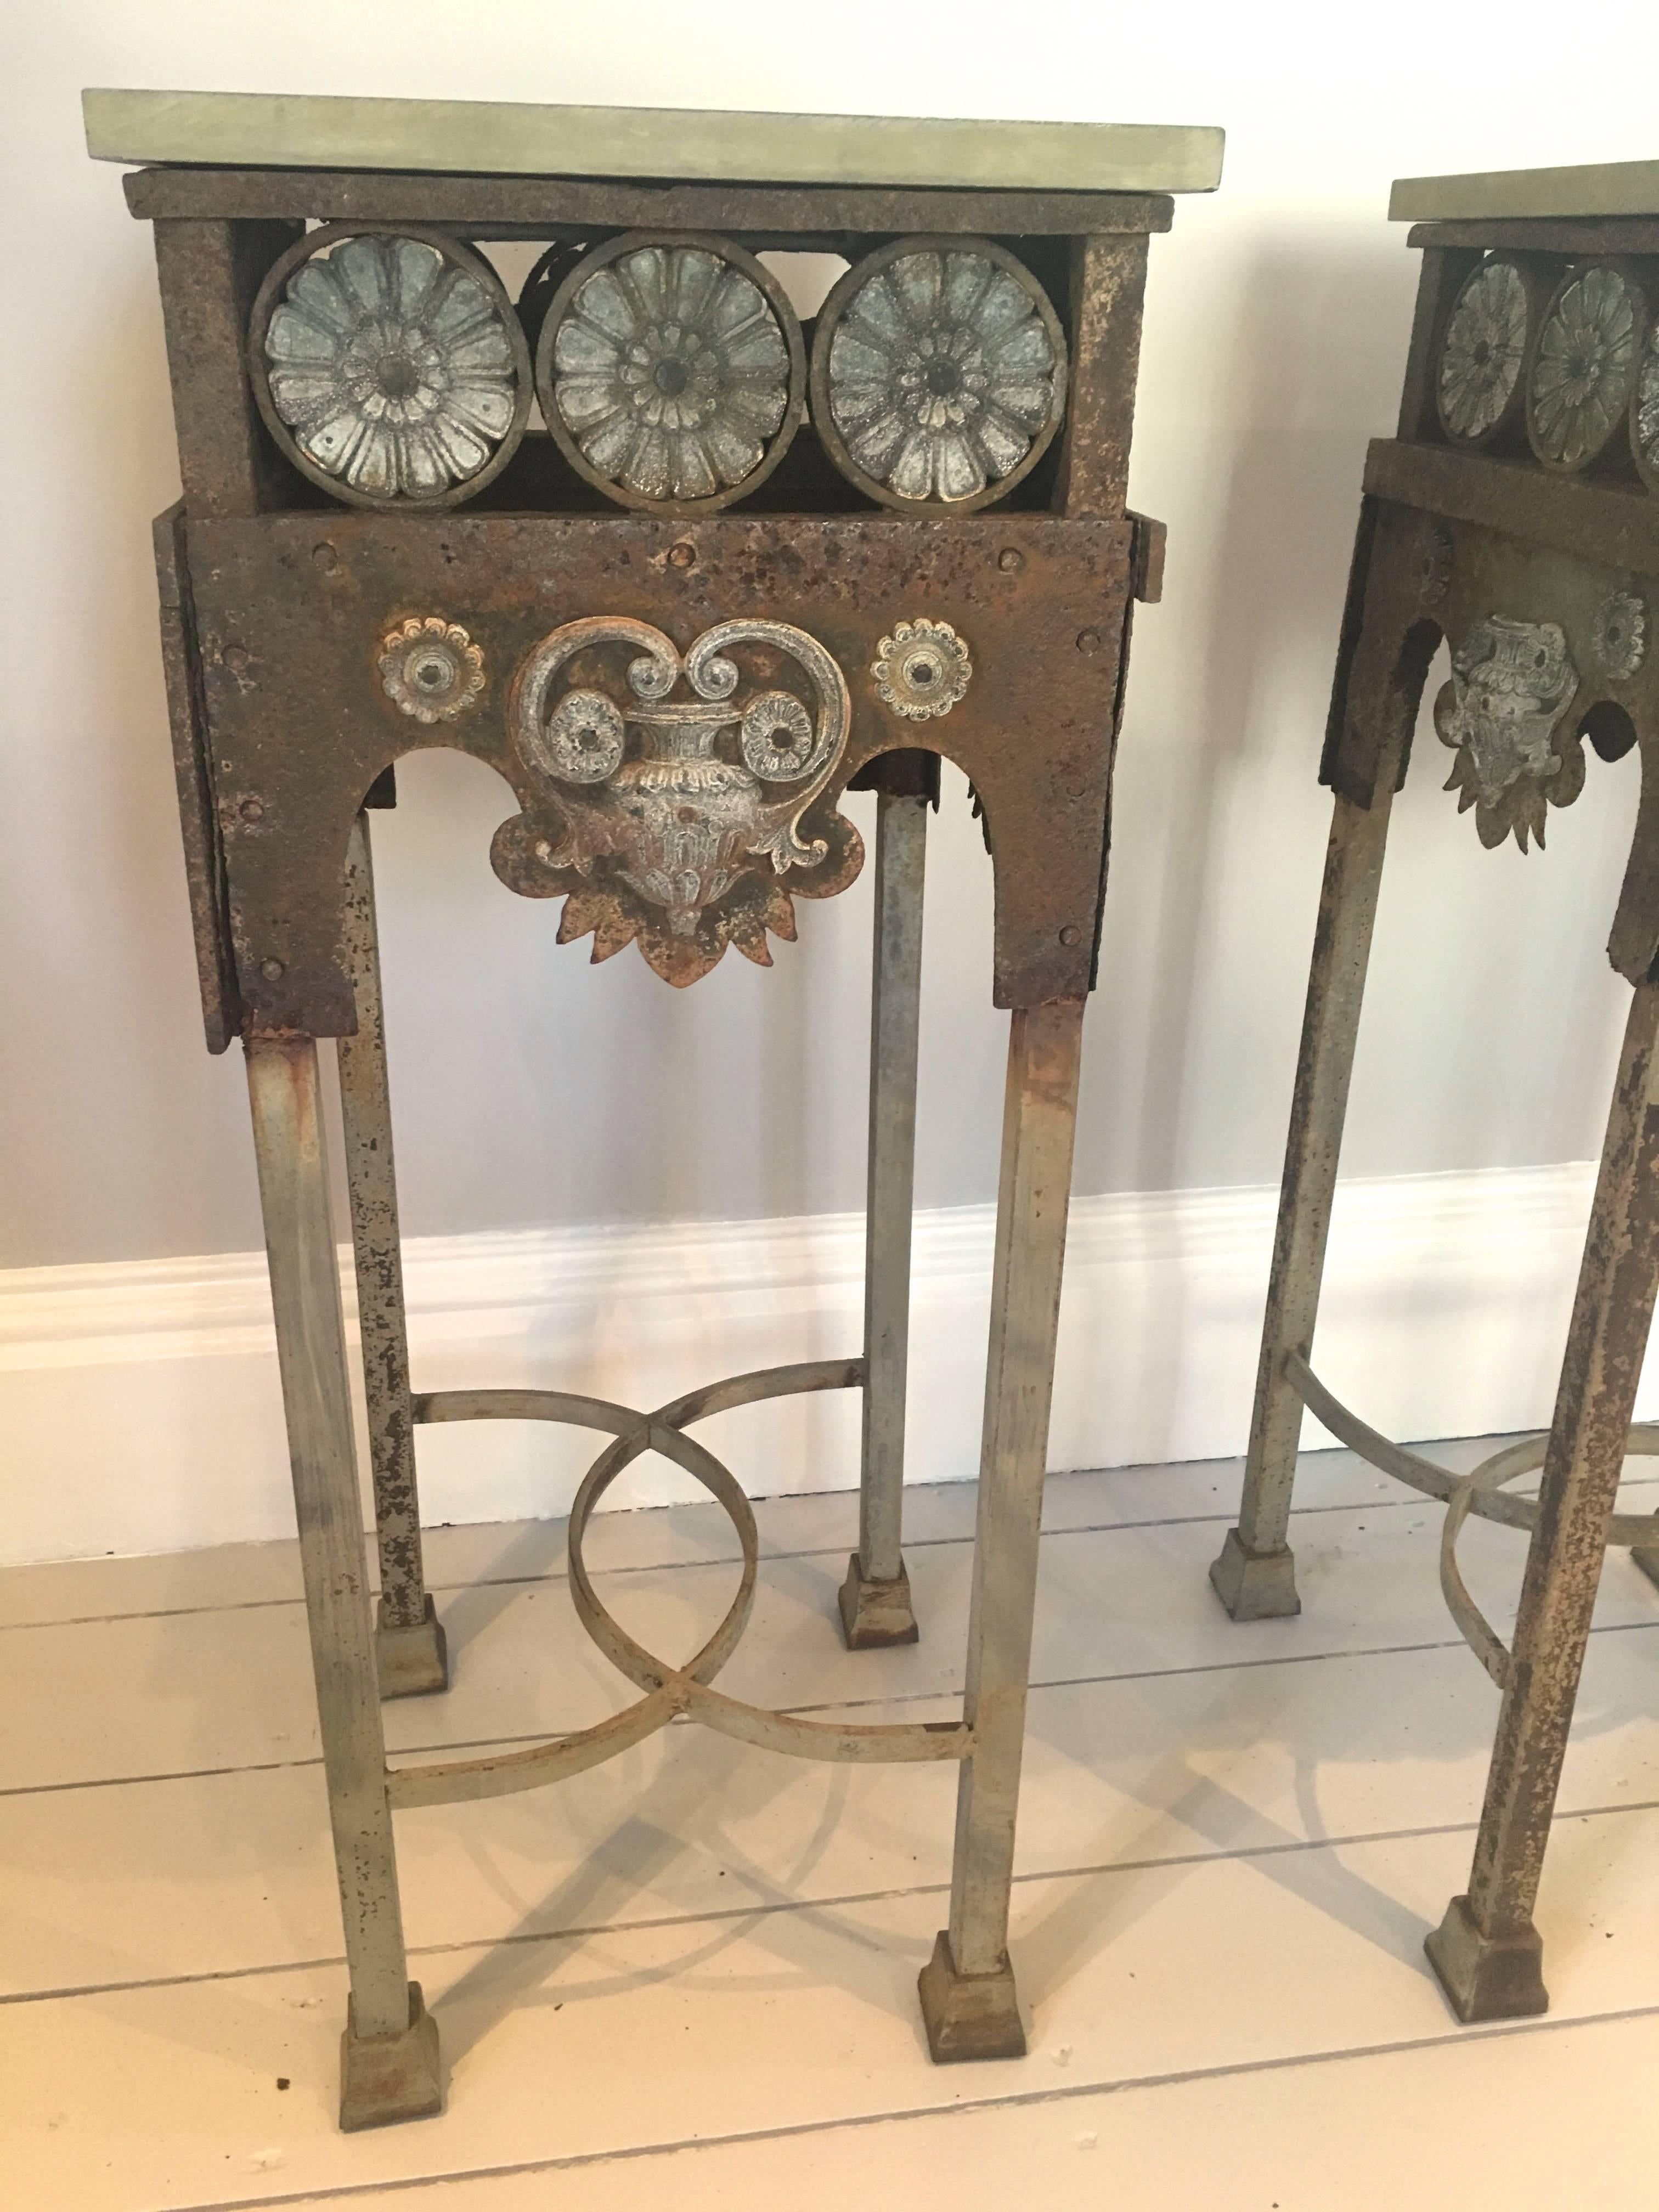 We believe these unusual and handsome stands to be a marriage of Gothic Revival riveted wrought iron and zinc bodies with later 20th century cast iron legs, stretchers and feet. The old wrought iron is well-worn and has thinned with minor losses in